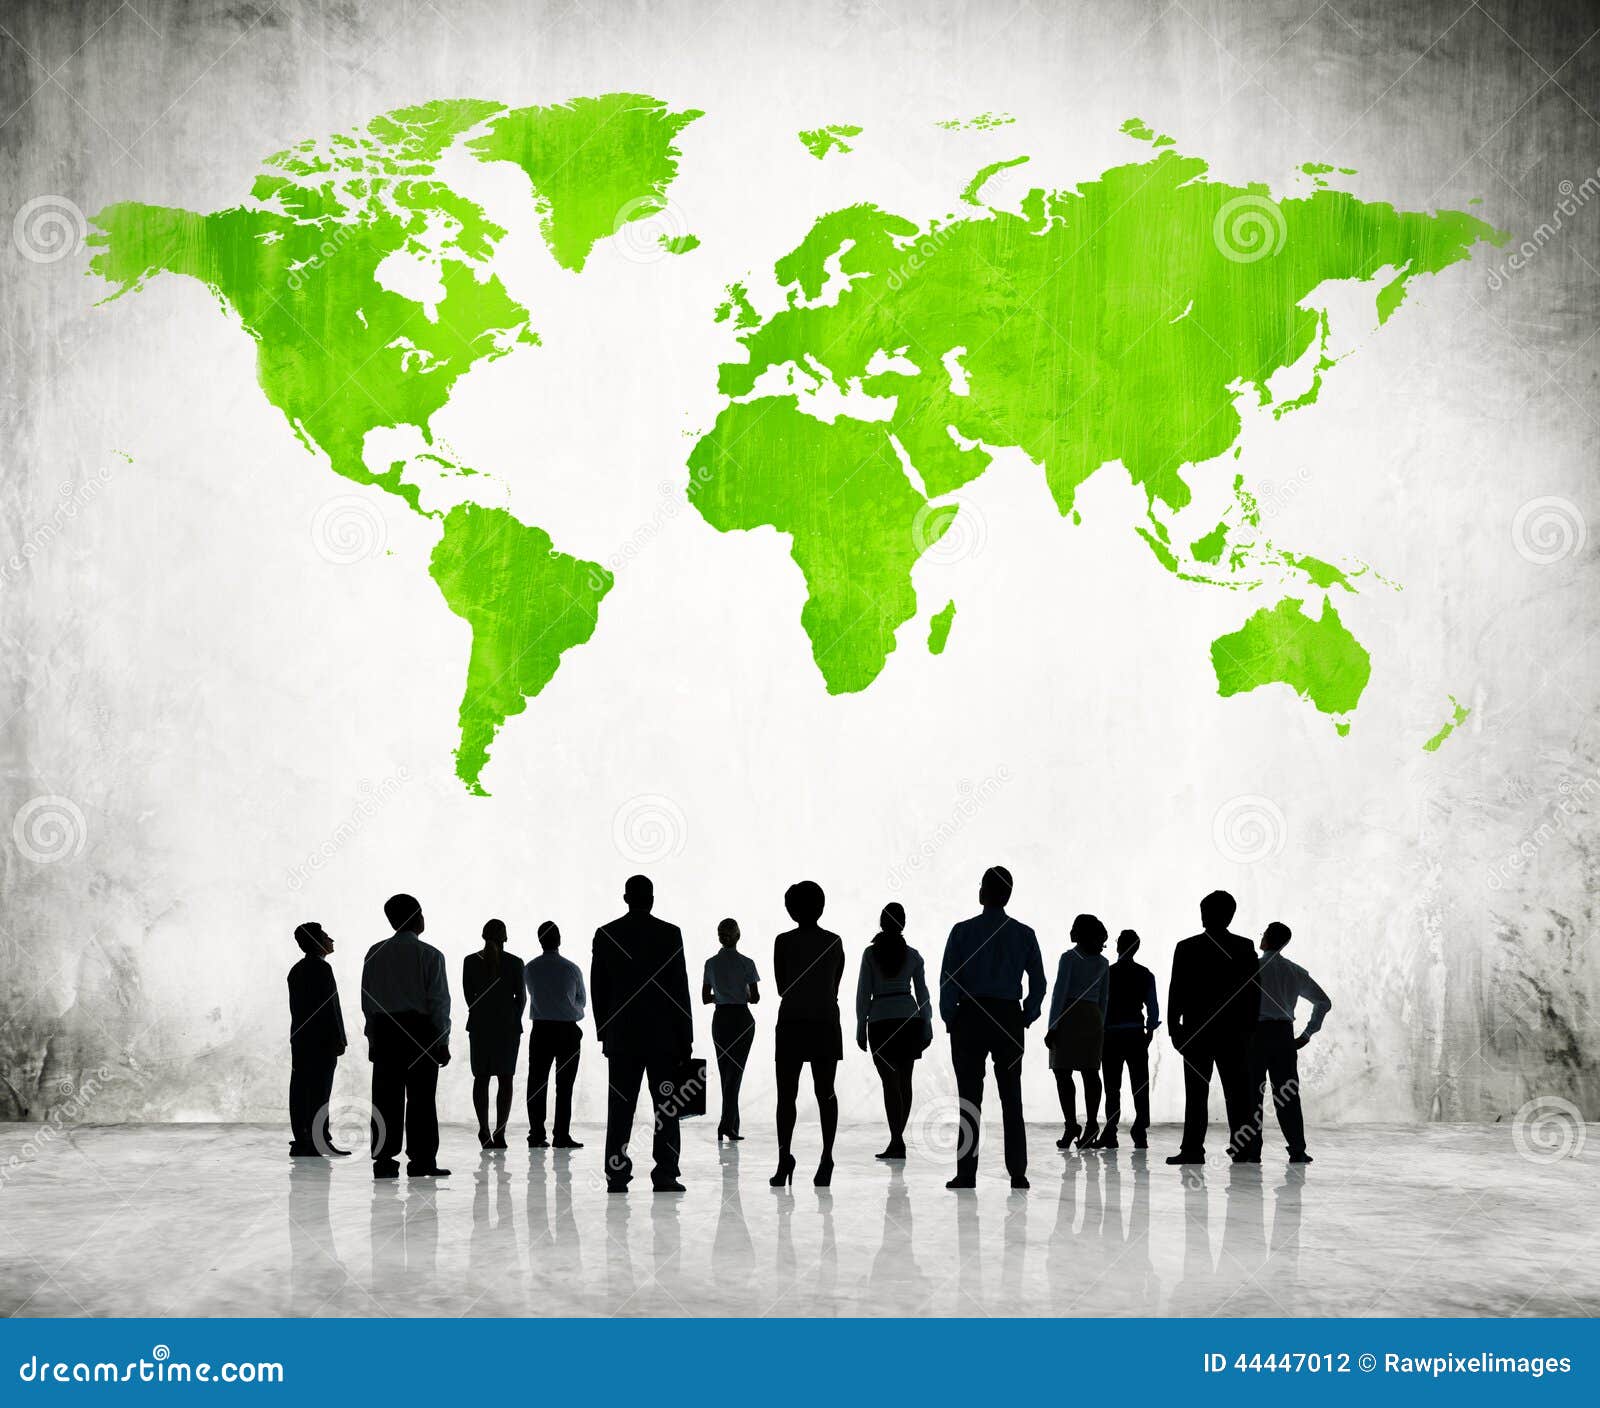 business people standing individually and a green cartography